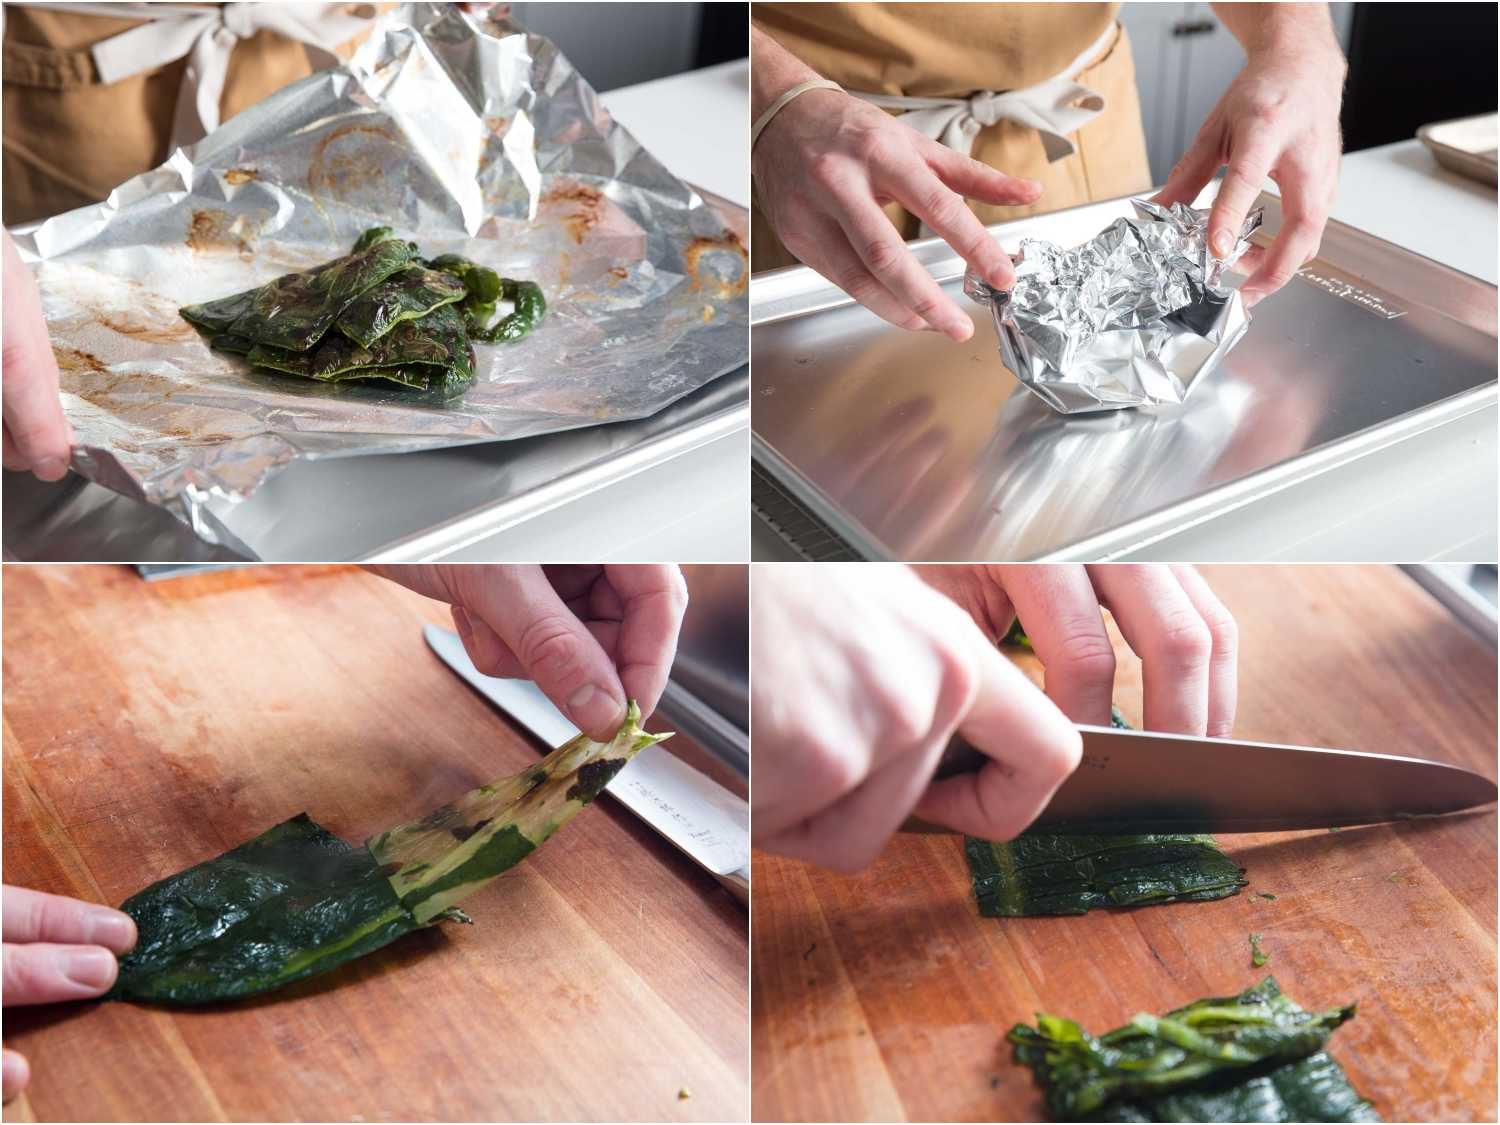 Process shots of placing poblanos in aluminum foil pouch and then peeling